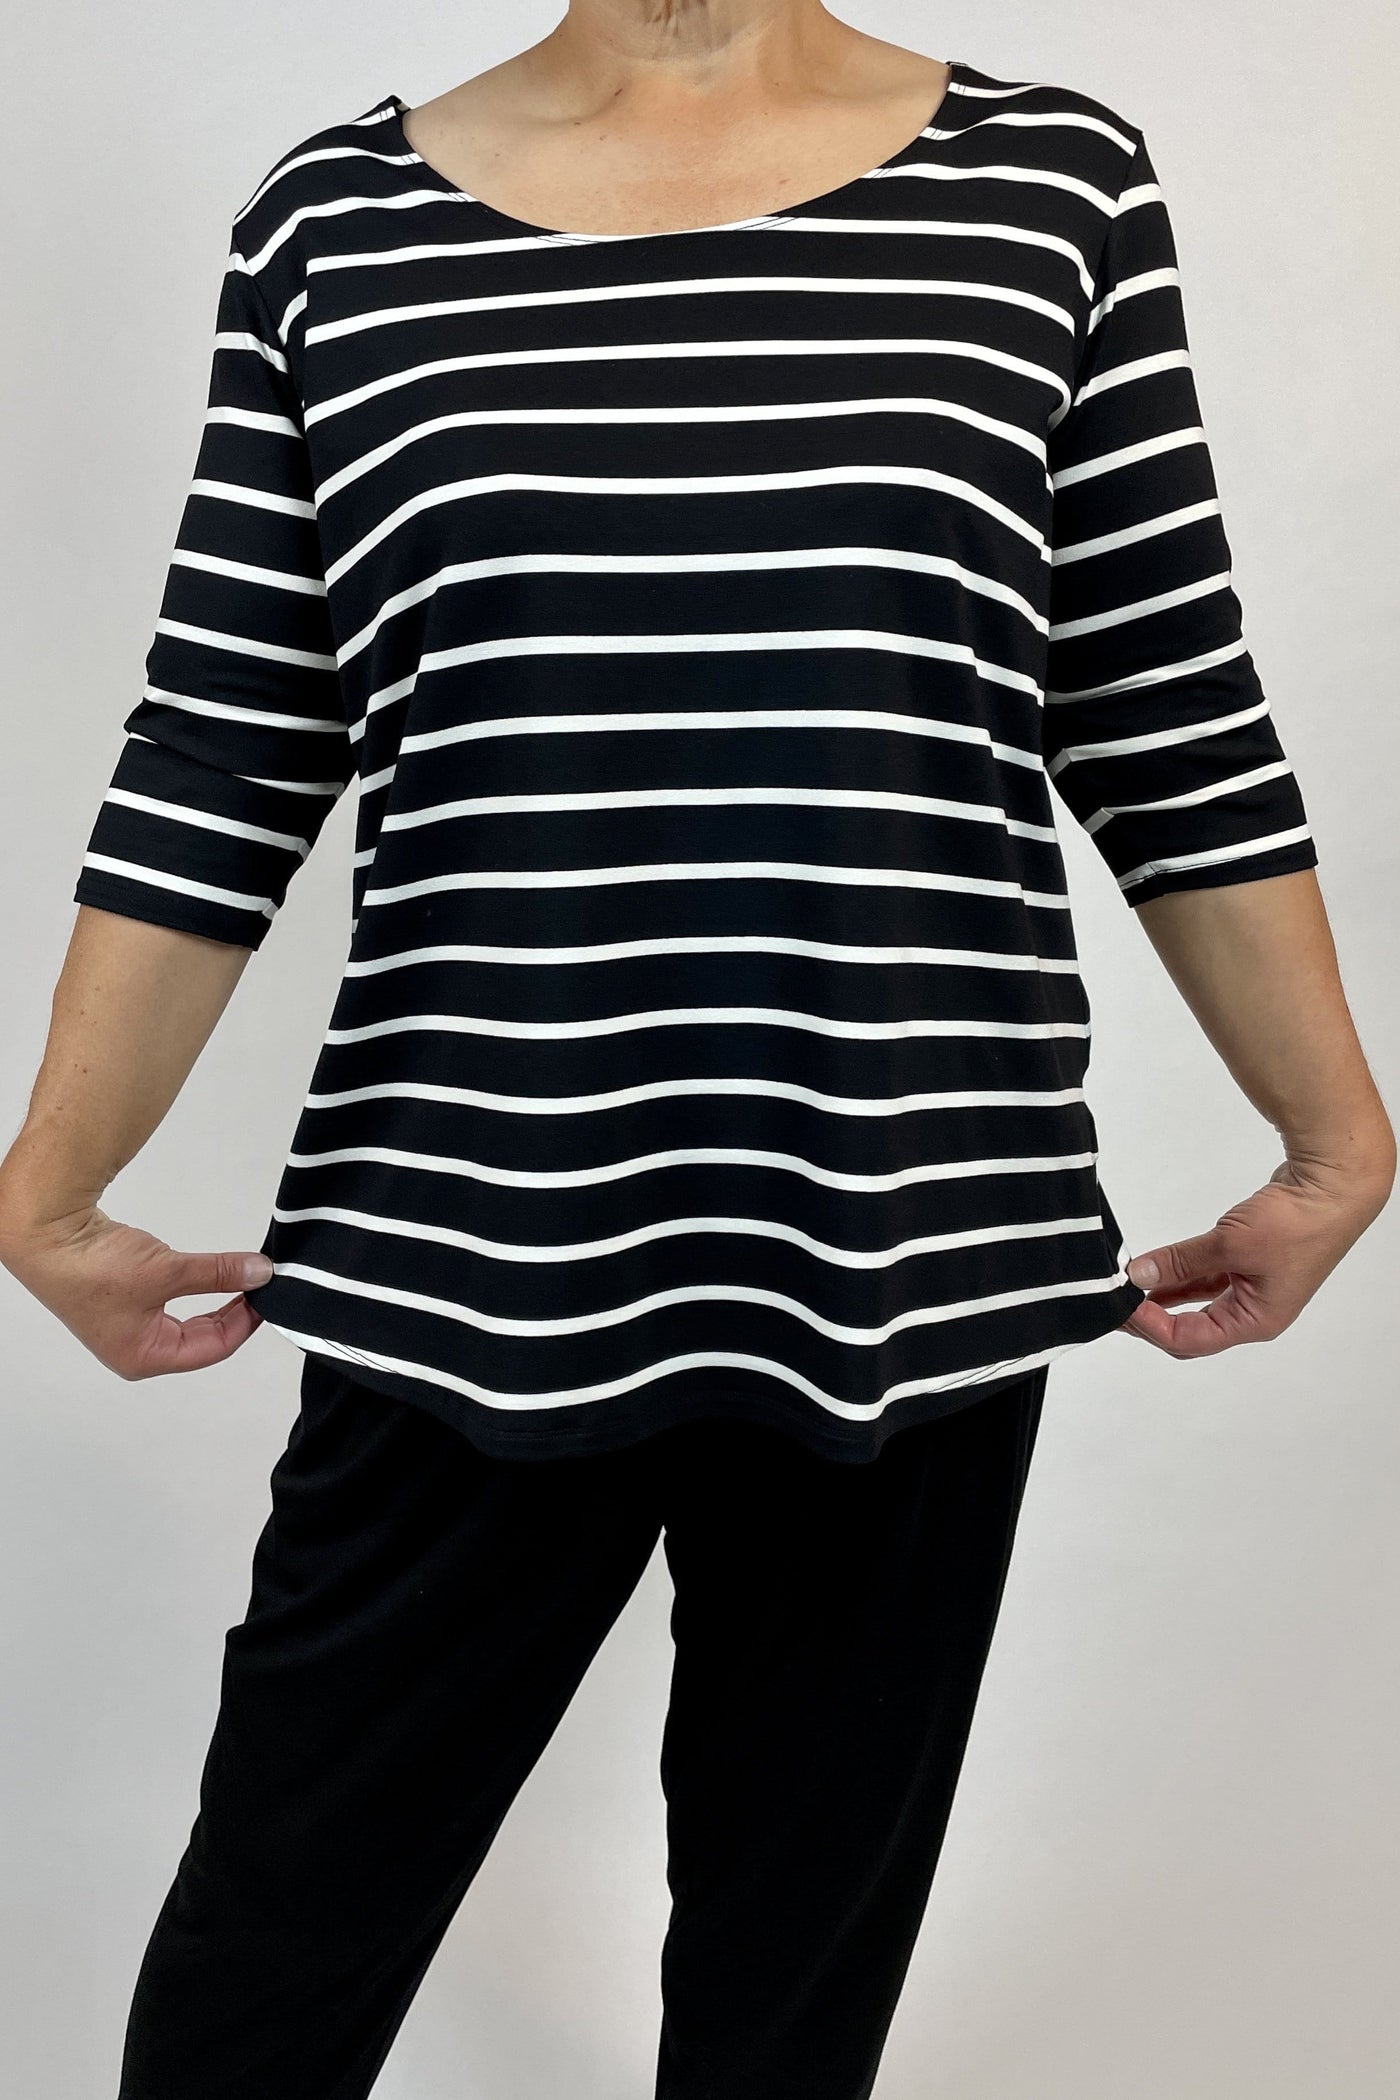 WEYRE Top relaxed scoop top black and white stripe